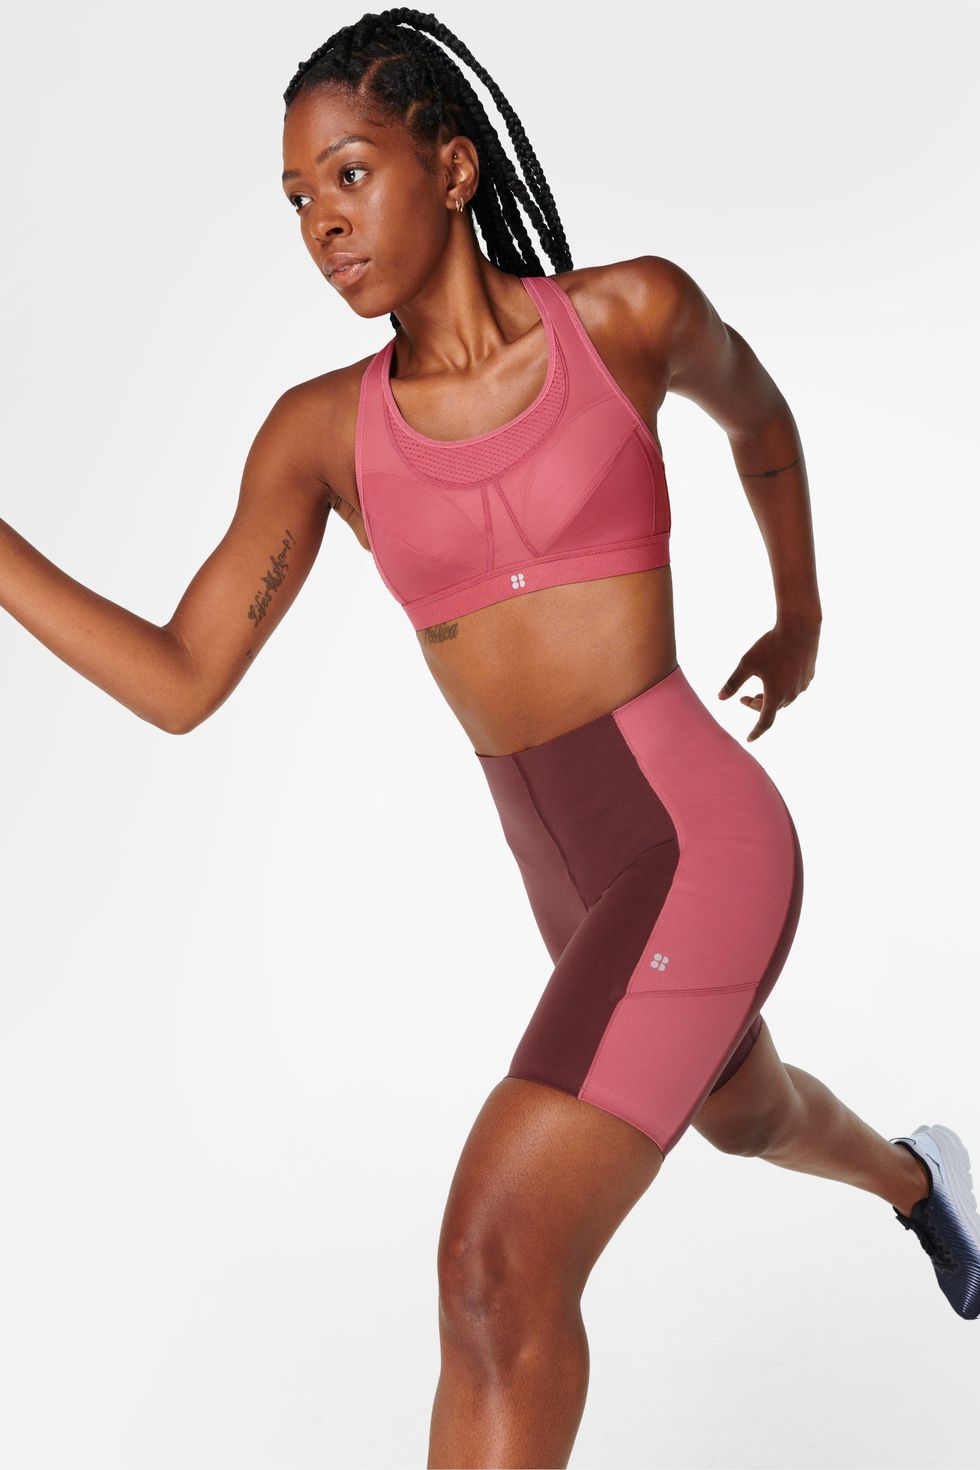 Sweaty Betty Black Friday deals 2022: What to expect in November